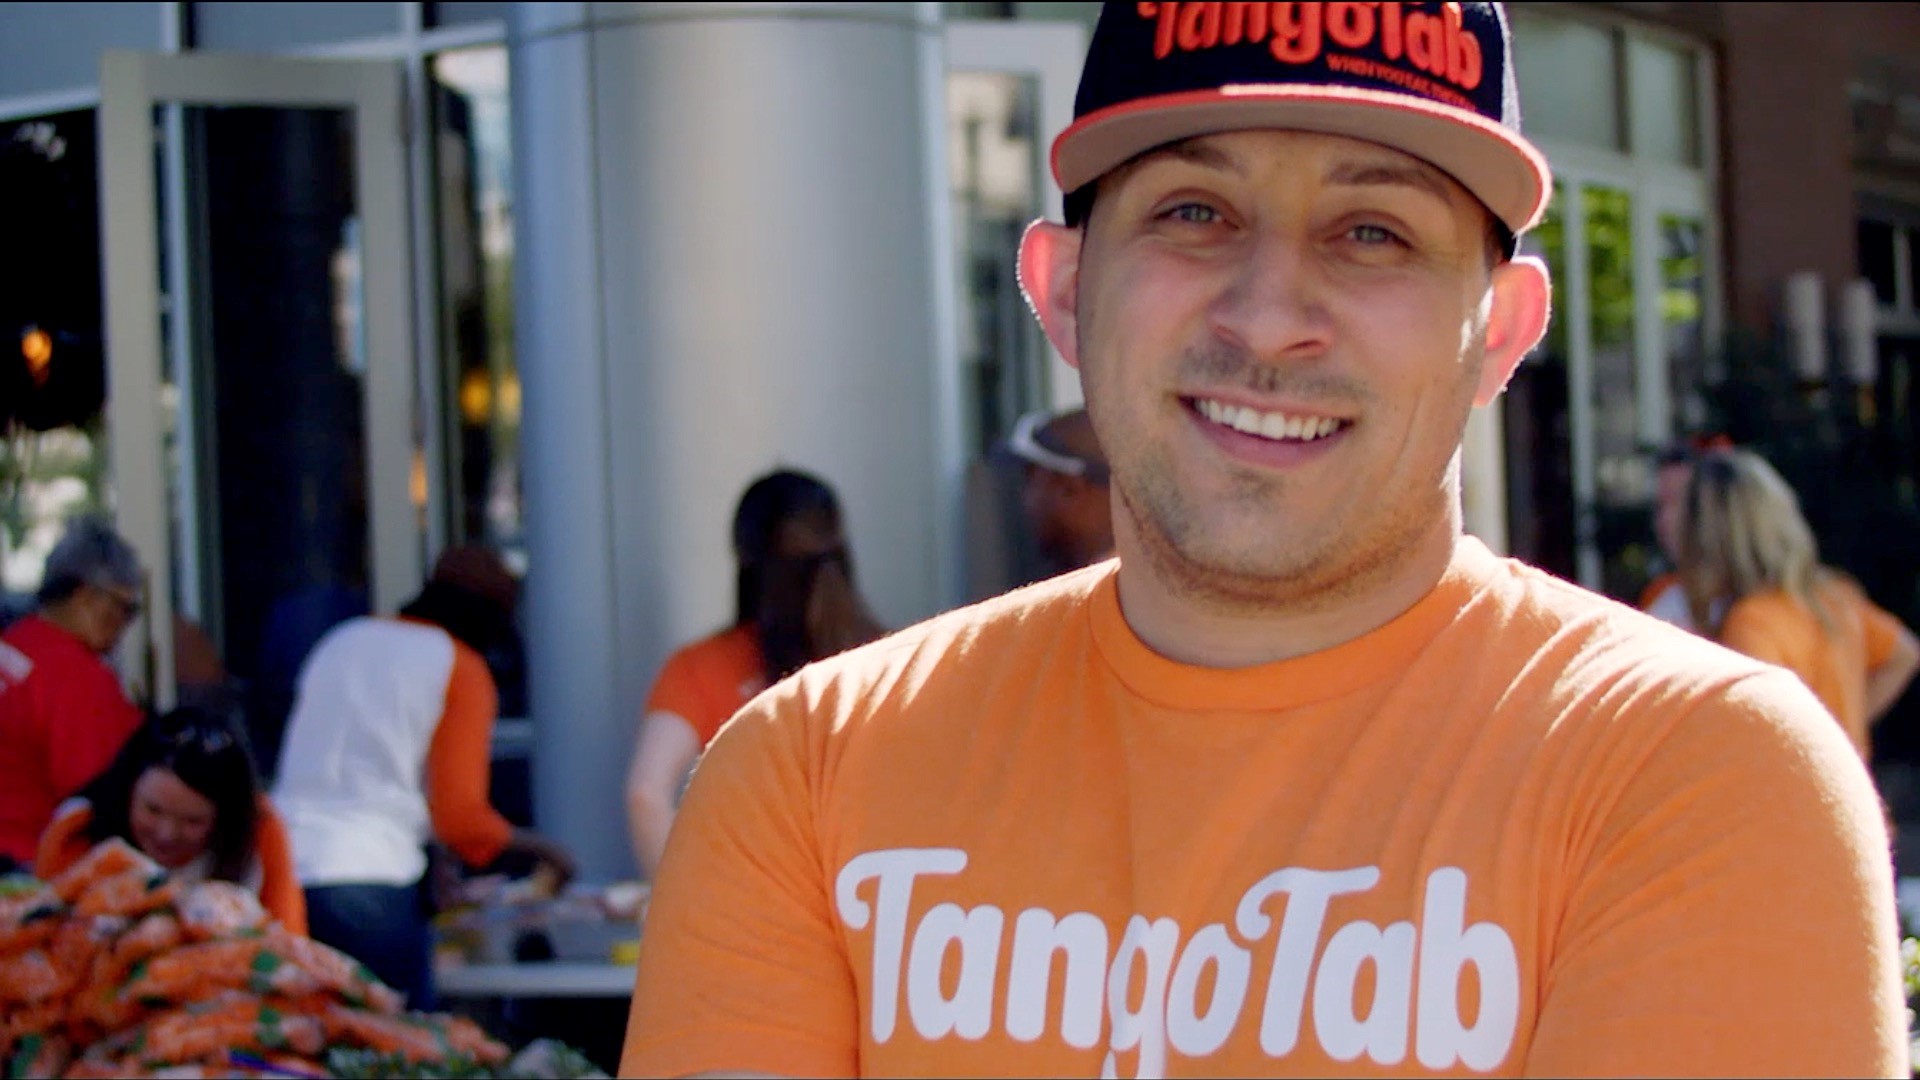 More committed than ever to feeding the hungry. Nick Marino Jr. of Tango Tab is finding new ways to meet the need.